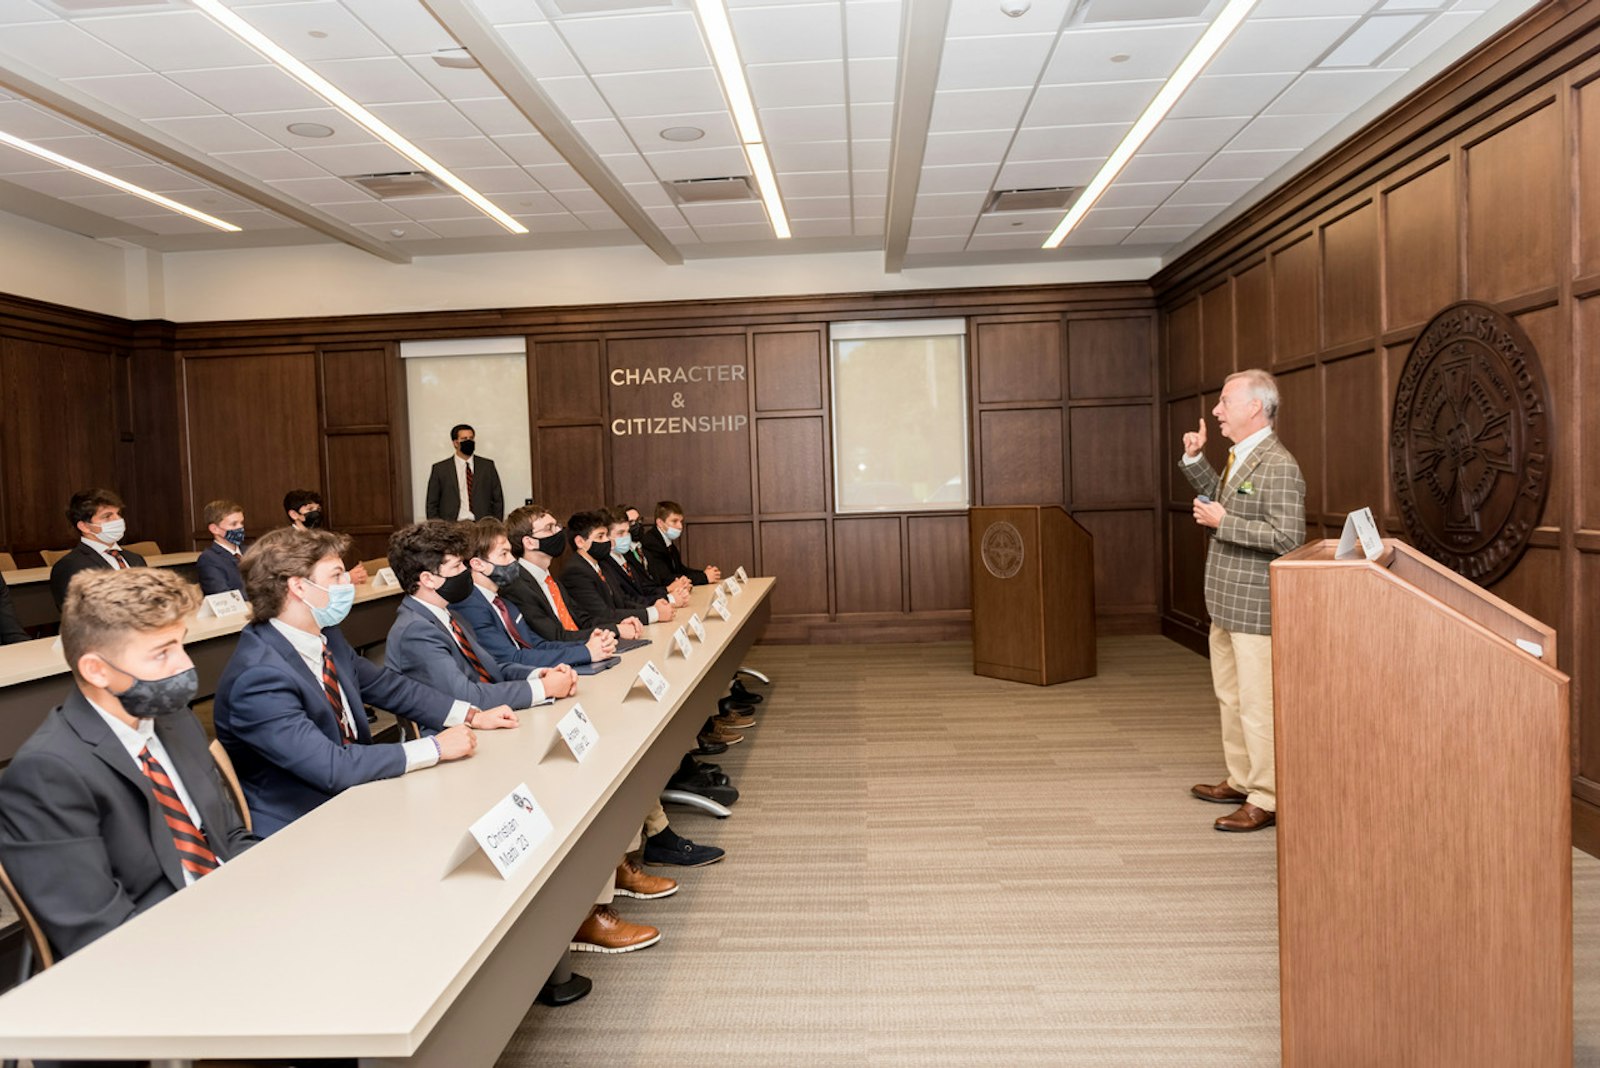 Michael Neus, a Brother Rice alumnus and senior special counsel at the Securities and Exchange Commission (SEC), talks with students in Brother Rice's new Mike Neus Institute for Character and Citizenship, part of the school's campus expansion.